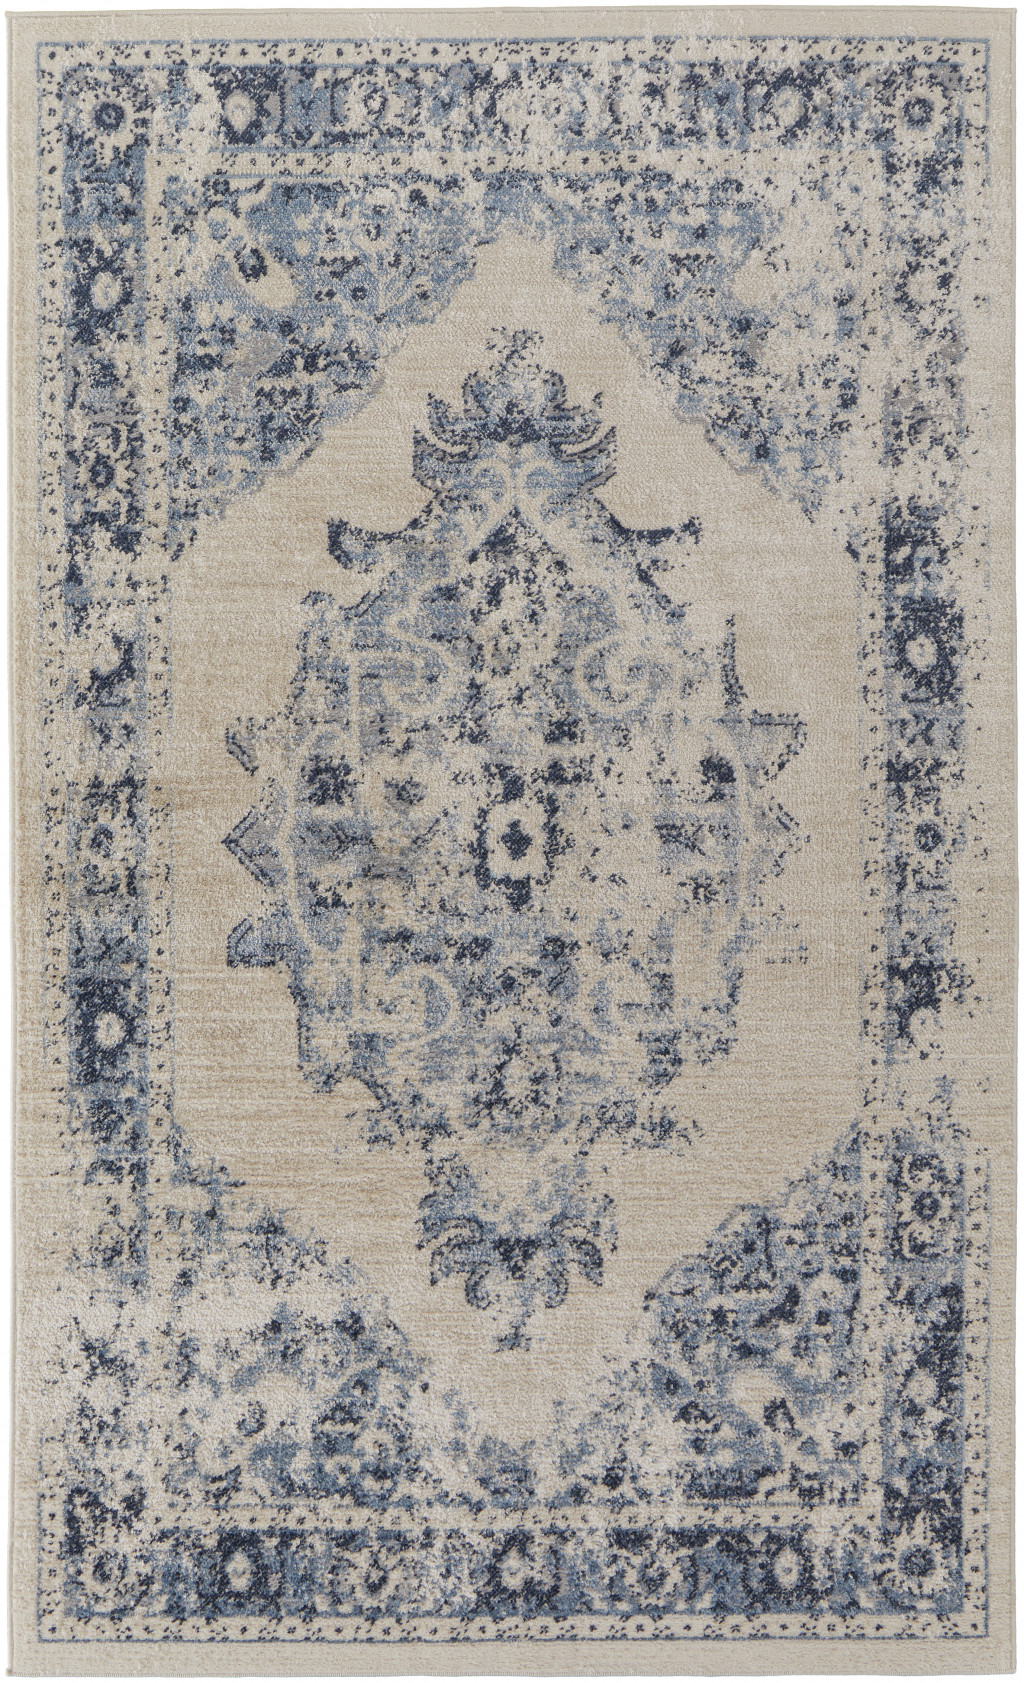 8' X 10' Ivory And Blue Floral Power Loom Distressed Area Rug-513307-1